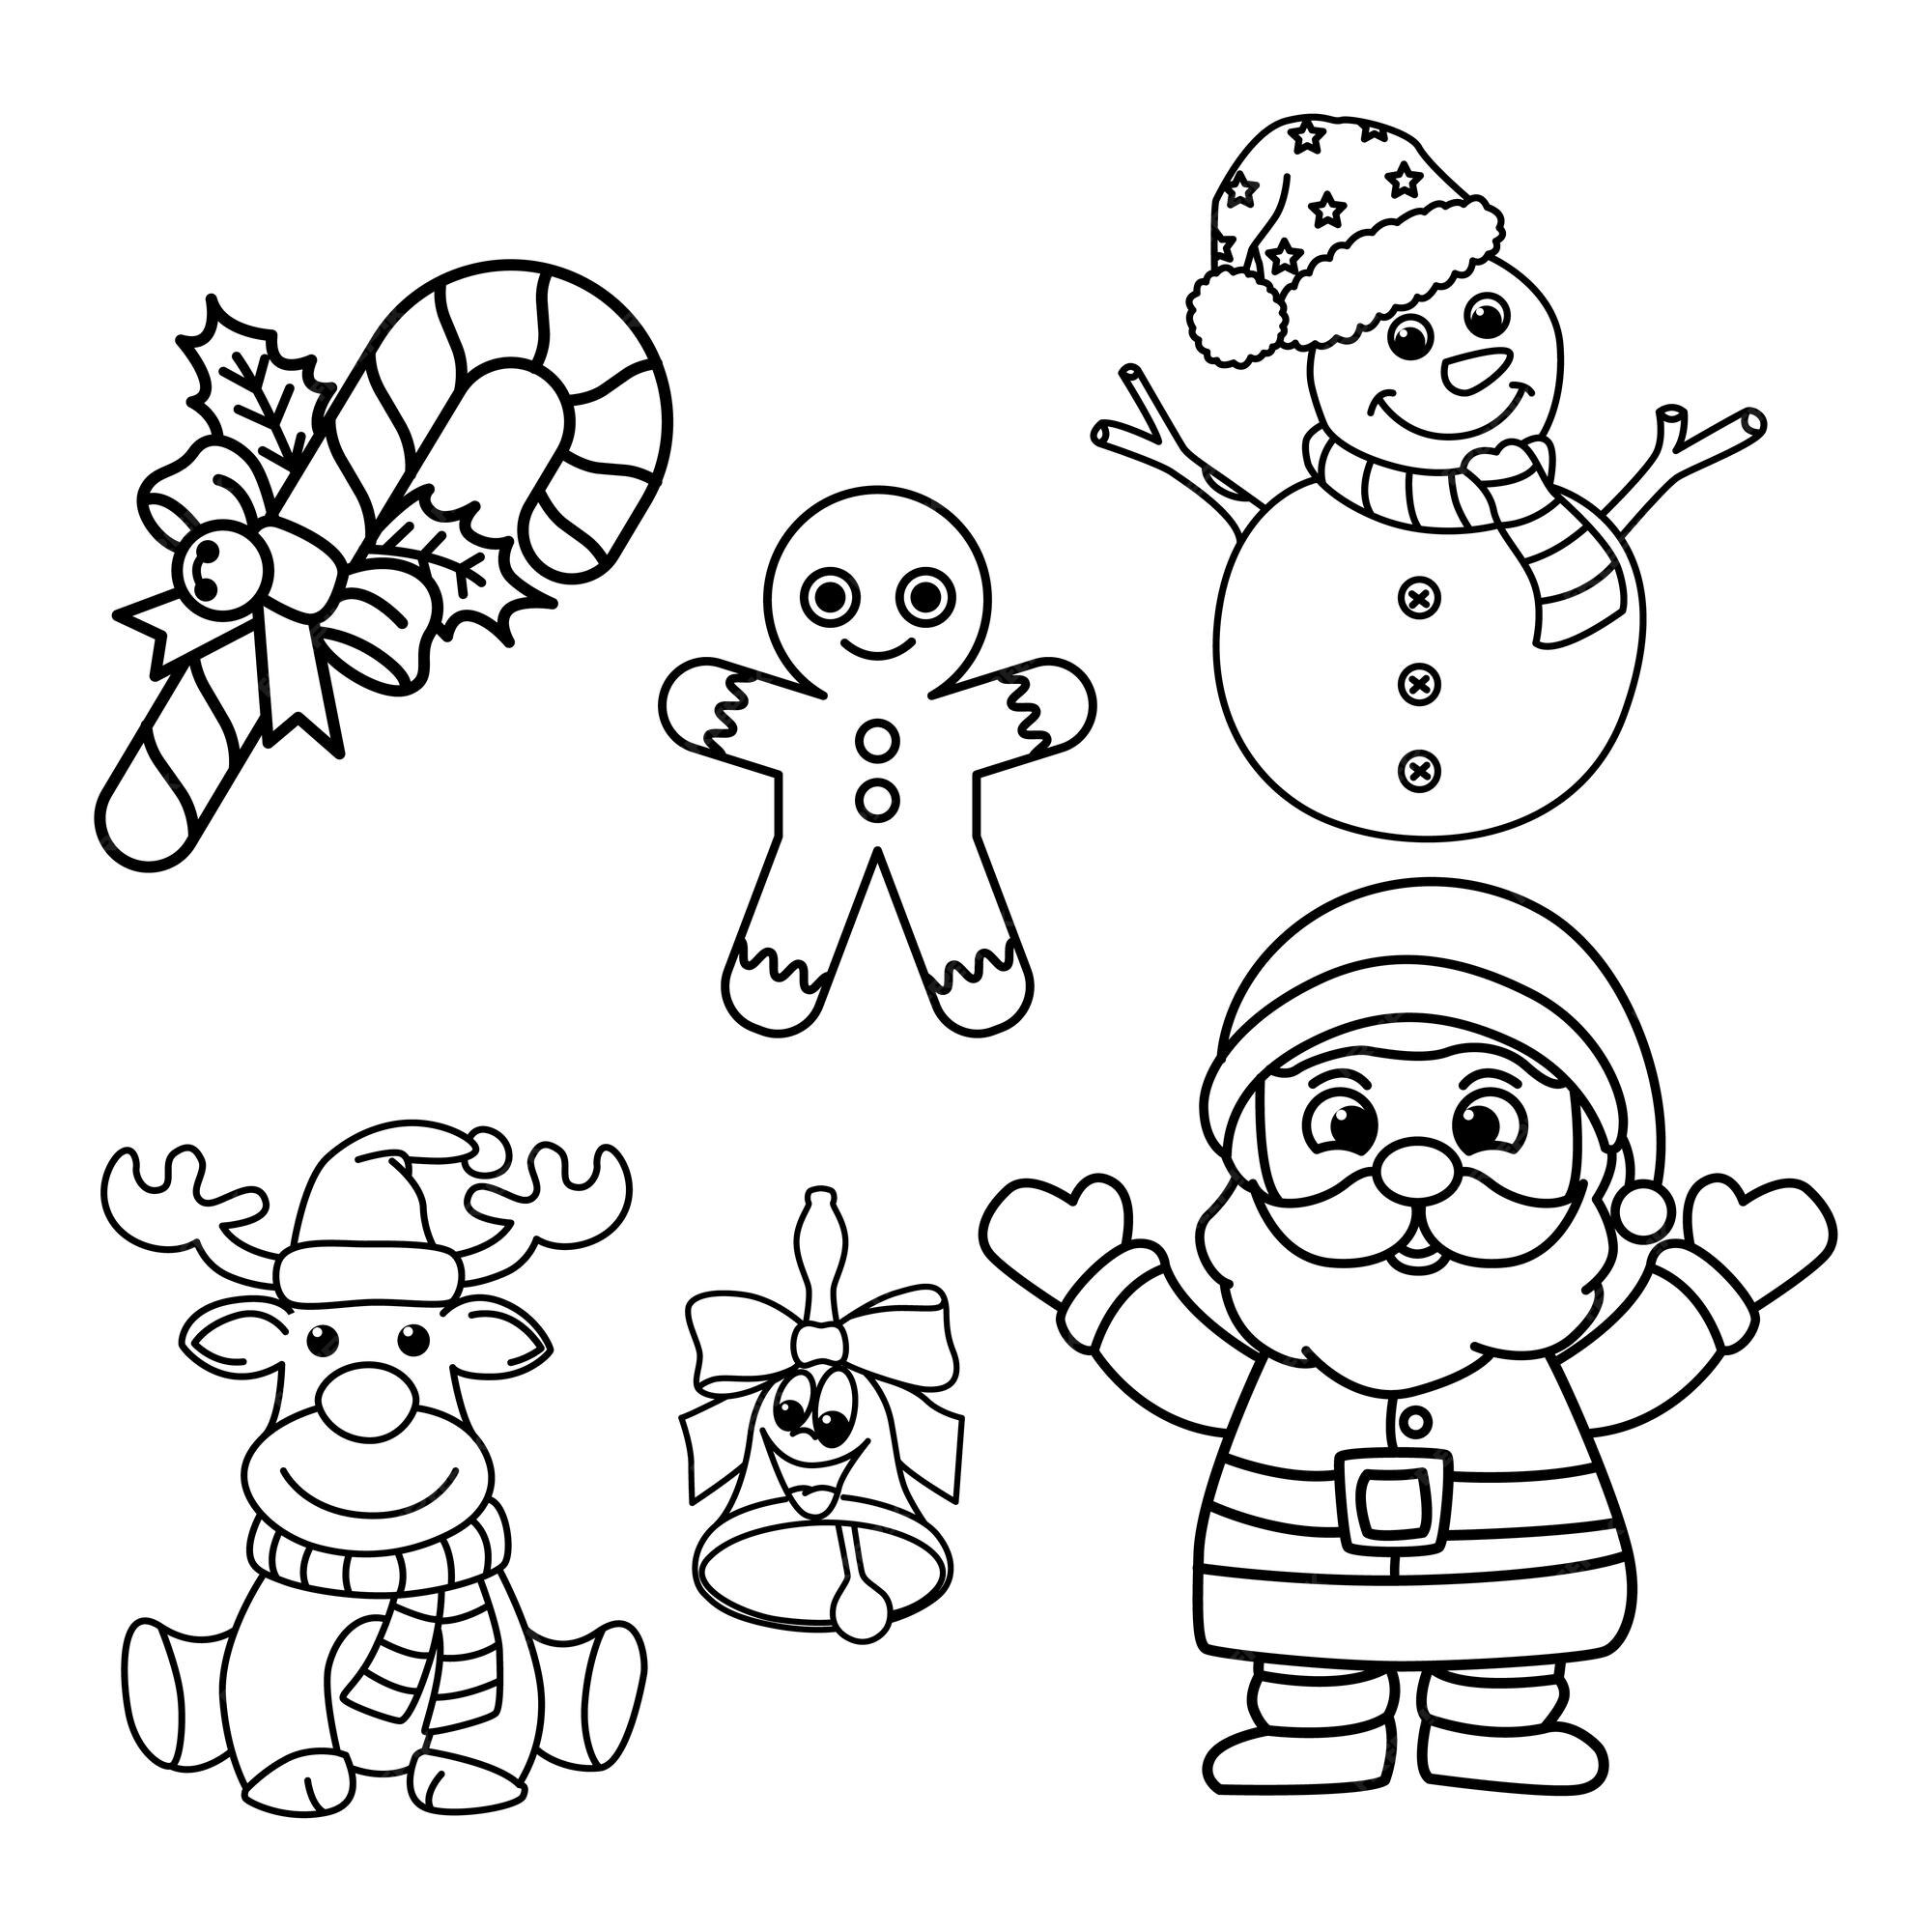 Christmas Coloring Page And Gifts For Kids Outline Sketch Drawing Vector,  Christmas Coloring Page, Christmas Drawing, Wing Drawing PNG and Vector  with Transparent Background for Free Download